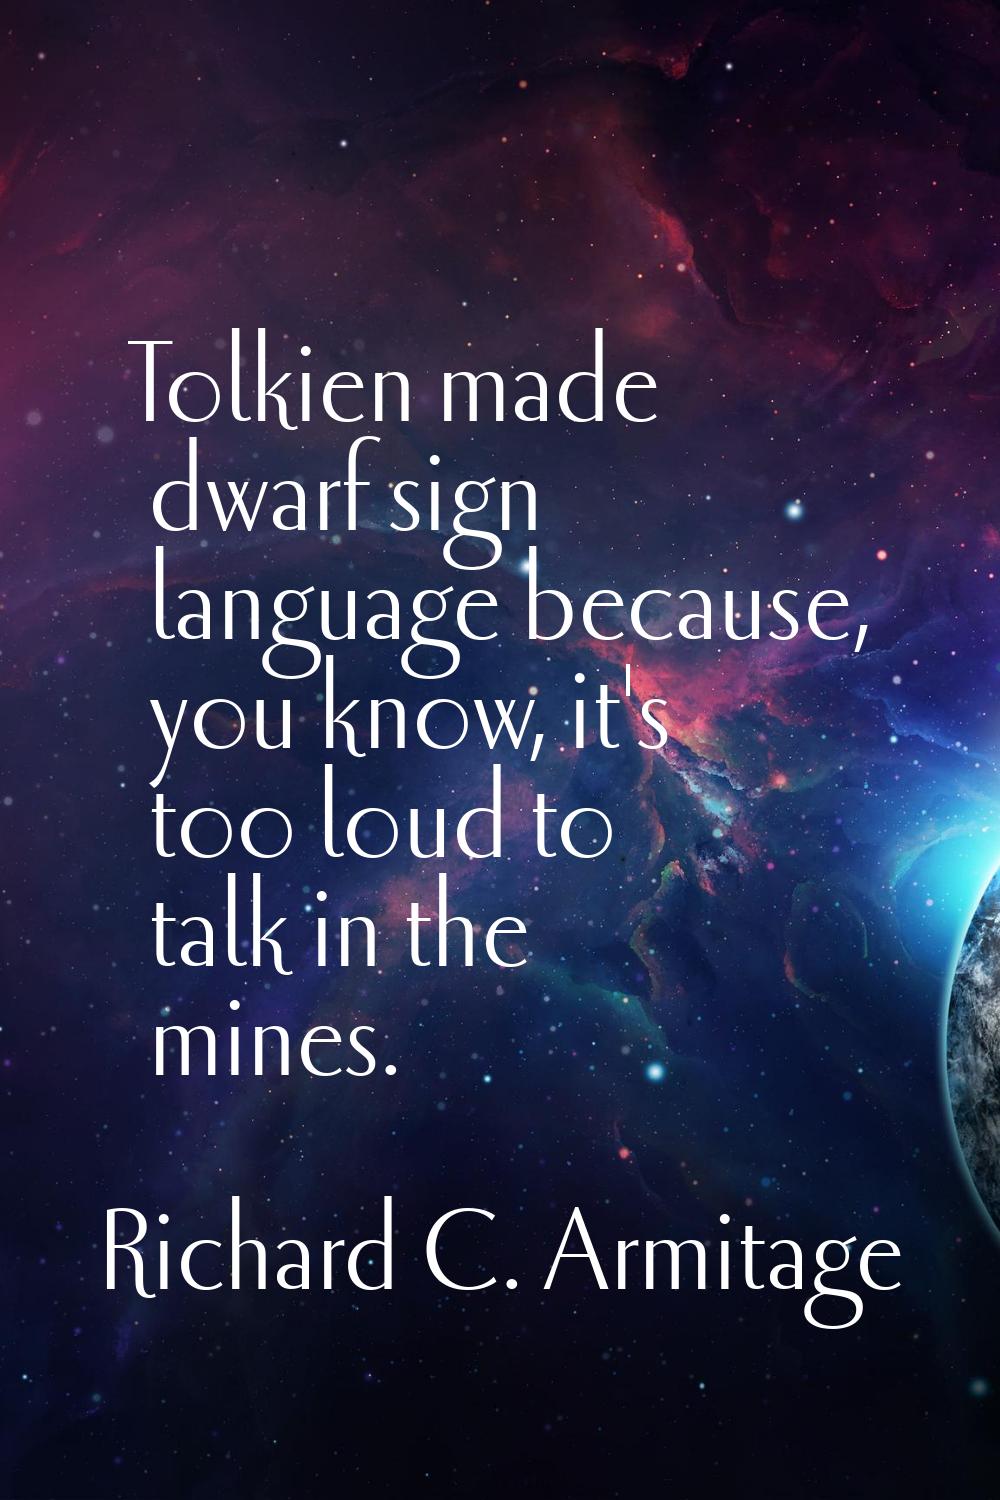 Tolkien made dwarf sign language because, you know, it's too loud to talk in the mines.